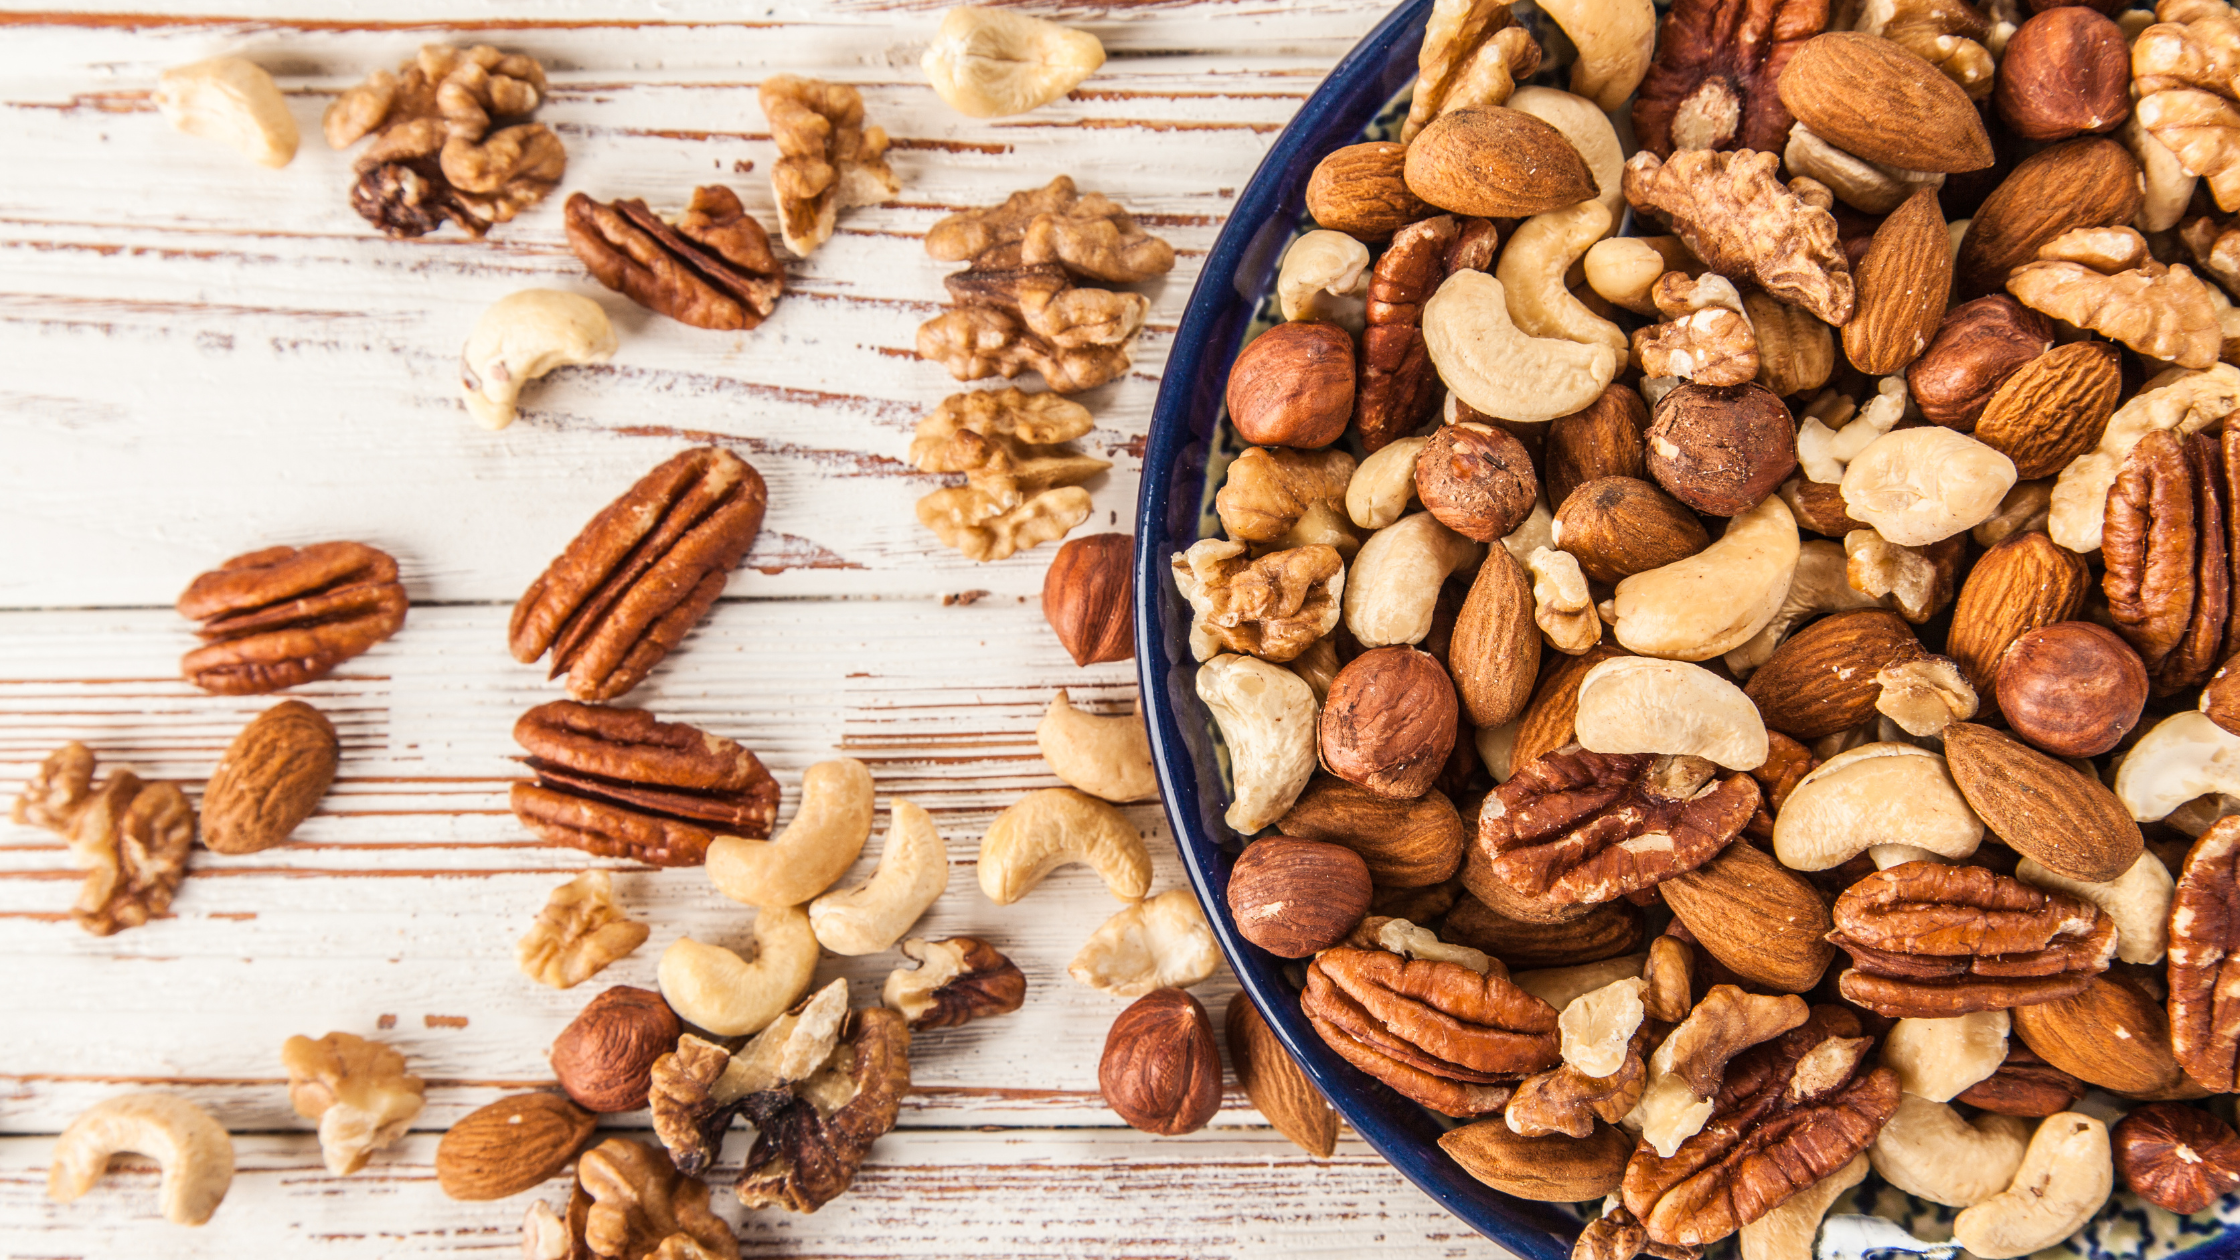 Discover Top-Selling Mixed Nuts or Create Your Own Nut Mix